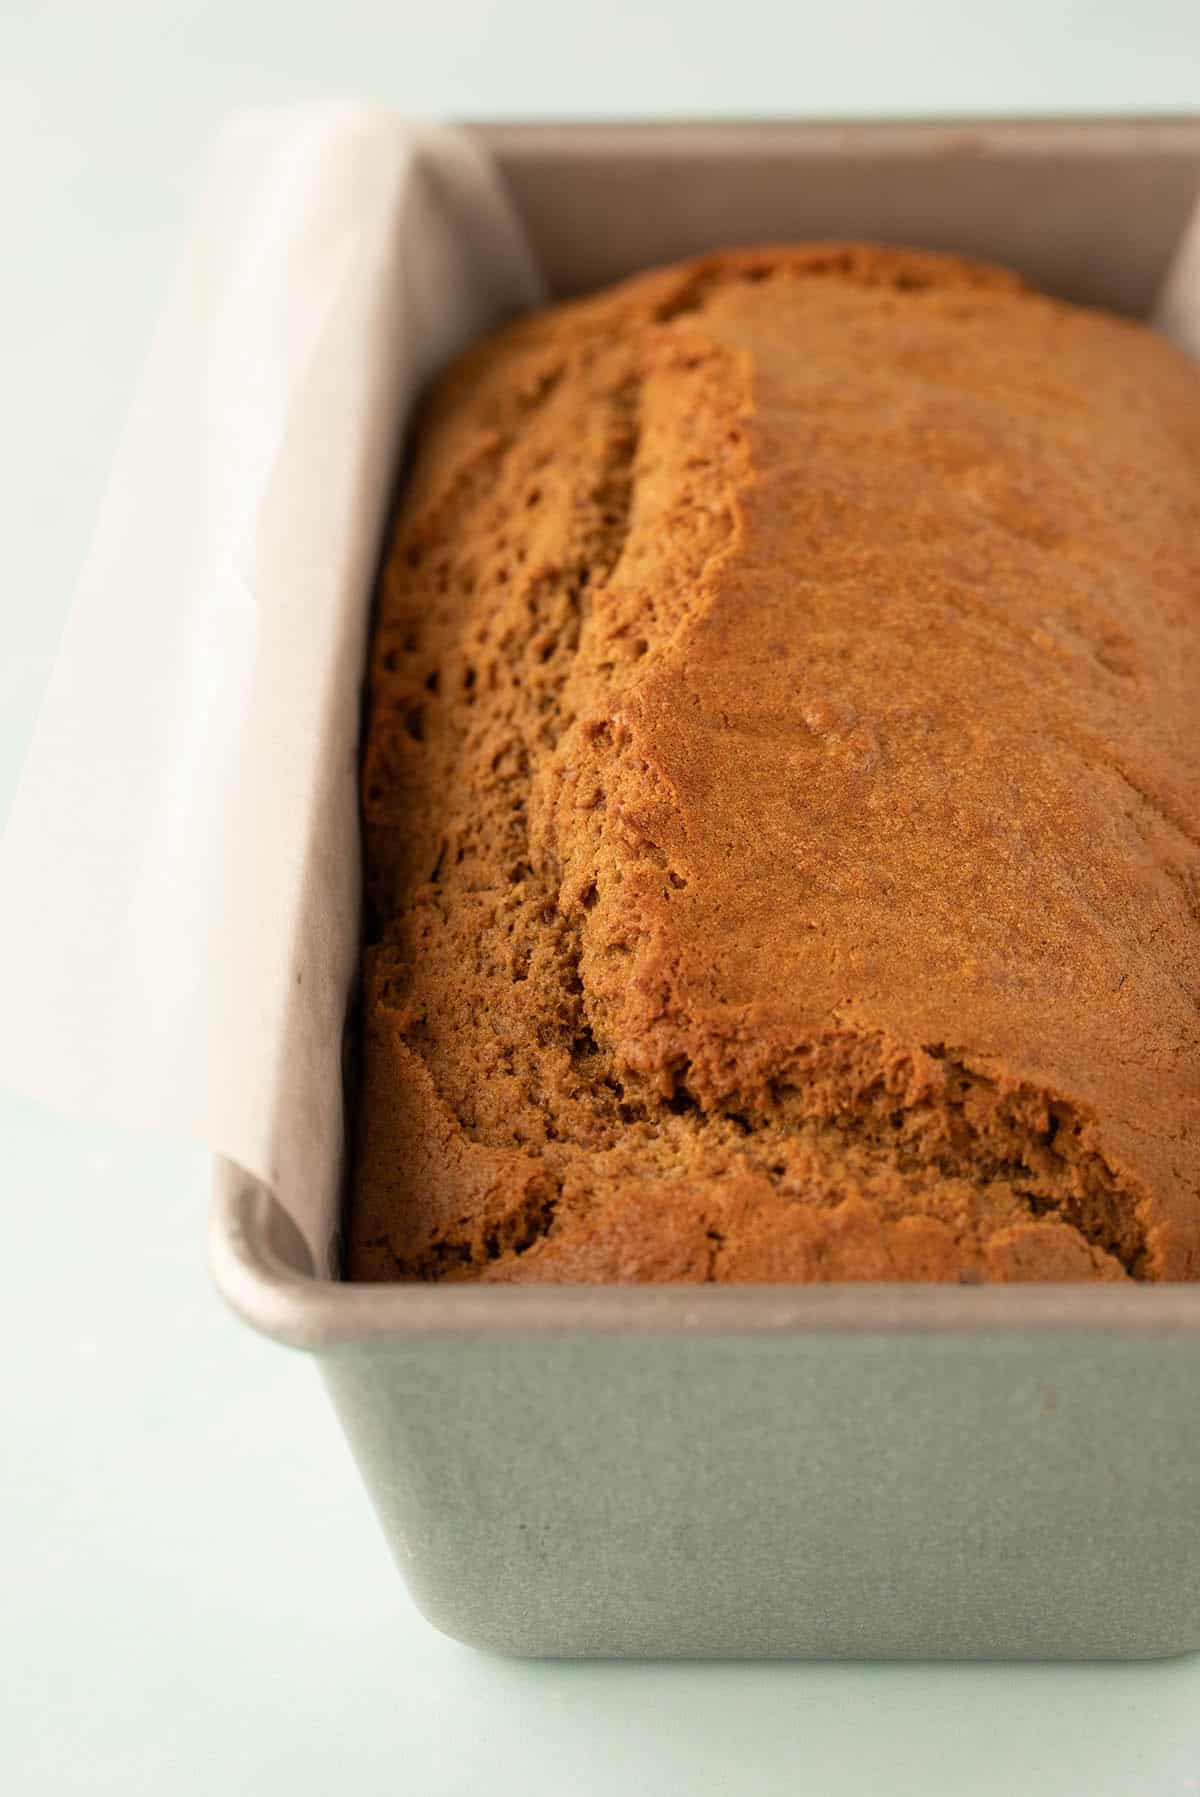 A Gingerbread Loaf Cake still in the cake pan fresh from the oven.